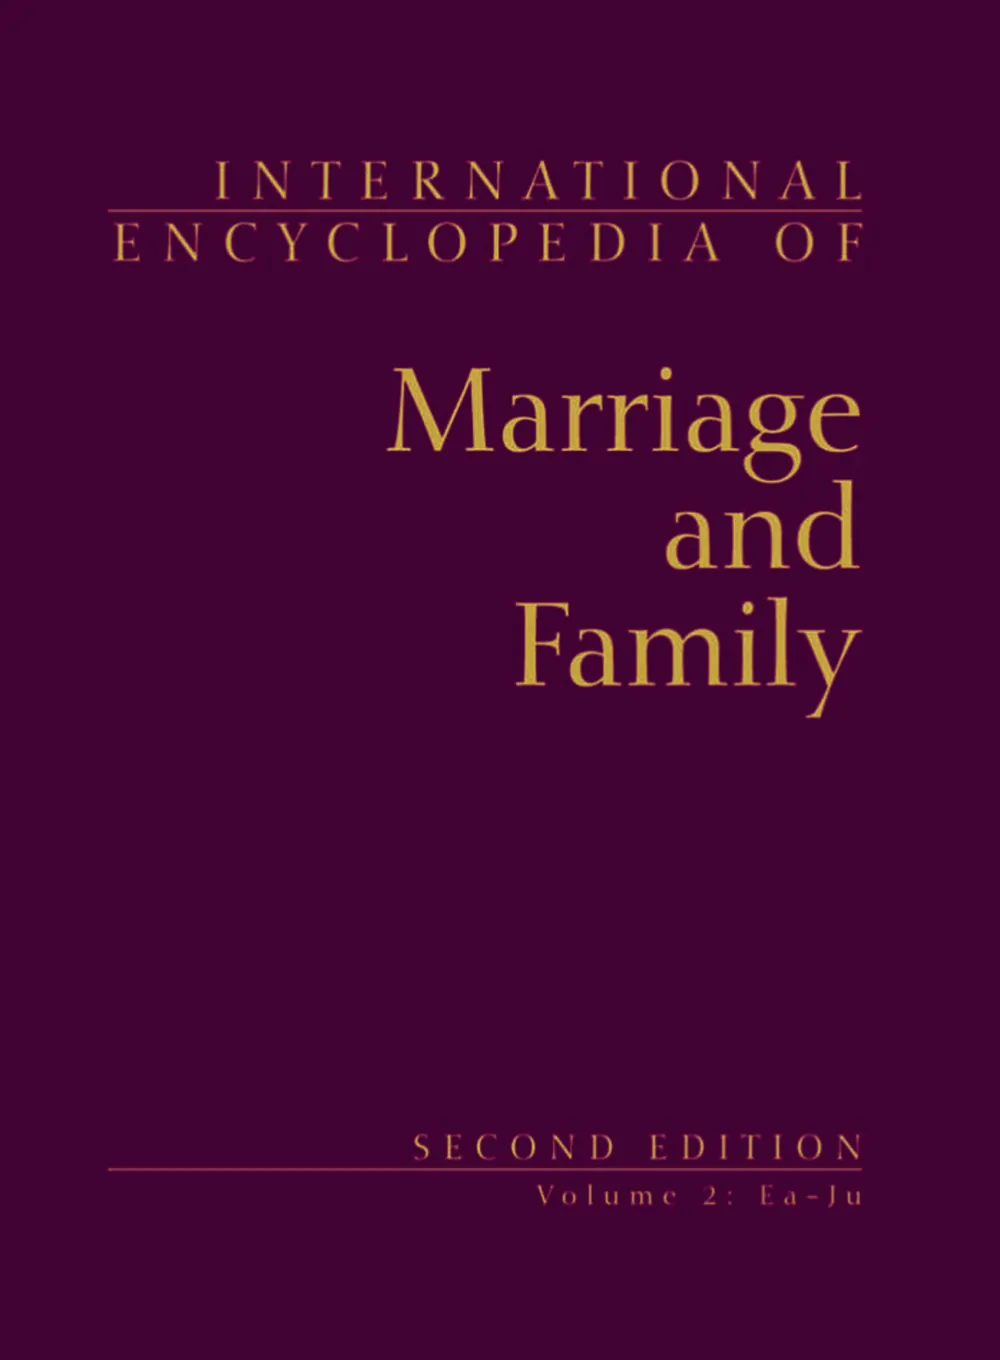 International Encyclopedia of Marriage and Family - Volume 2